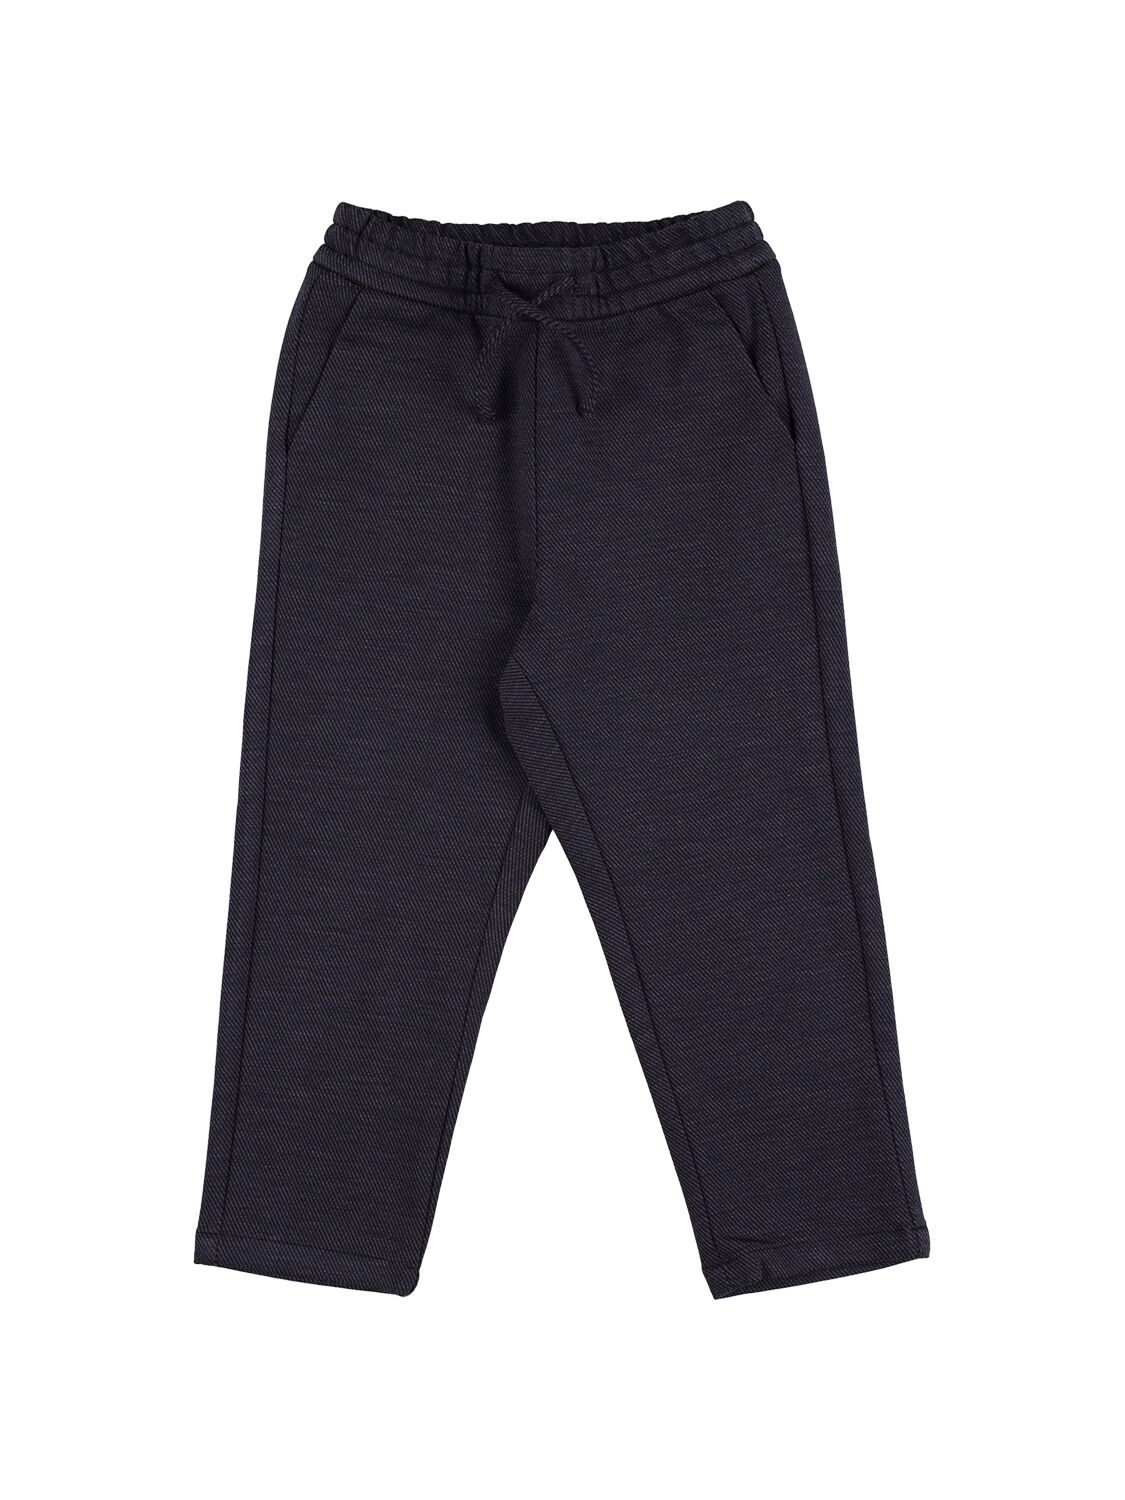 Bonpoint Kids' Timi Viscose Blend Straight Pants In 네이비